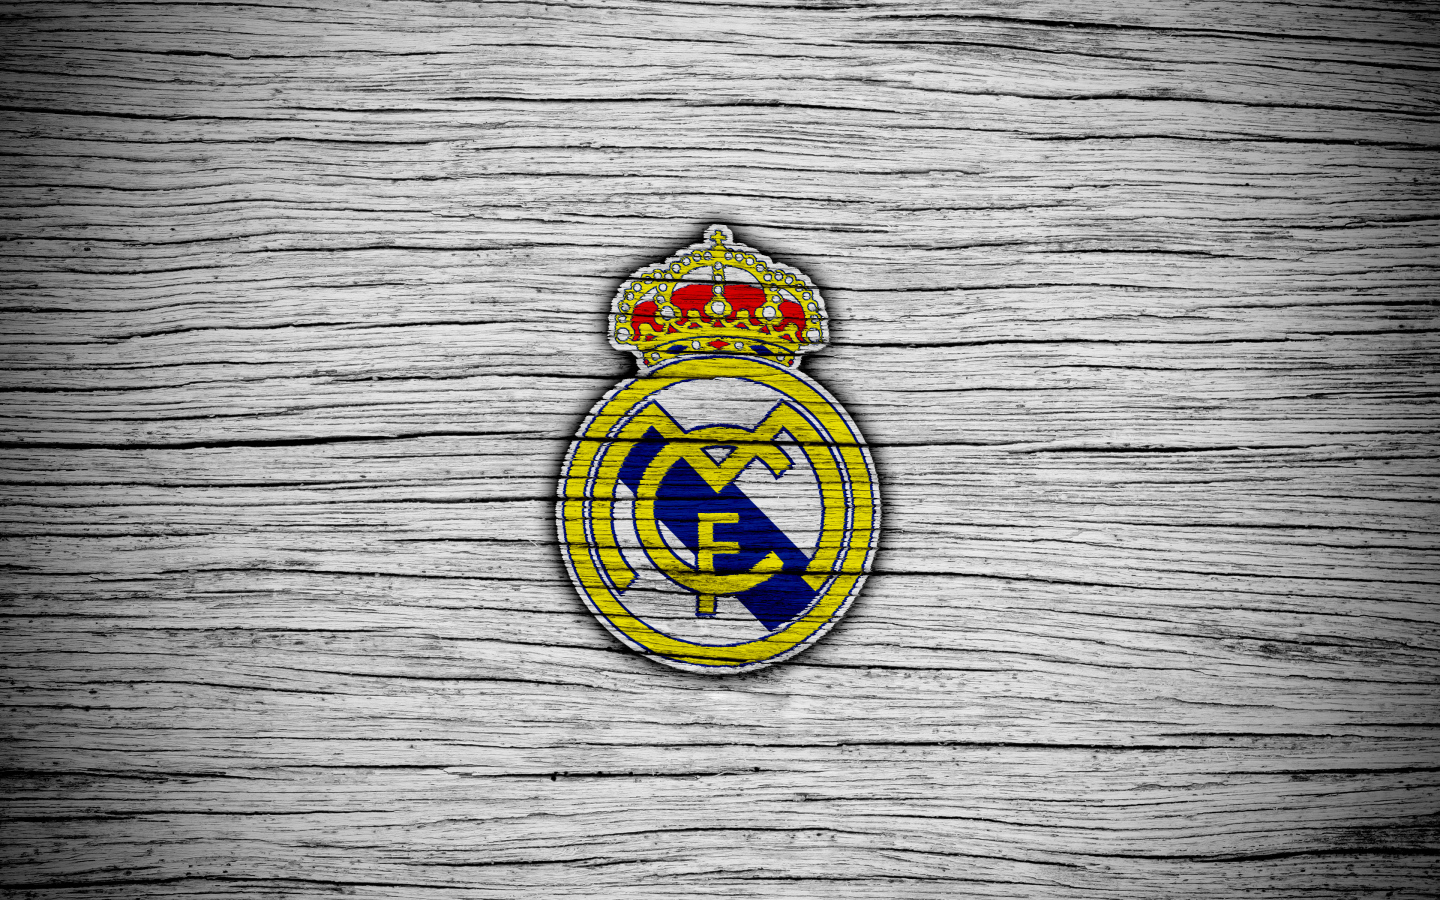 The logo of the football club Real Madrid on a gray background